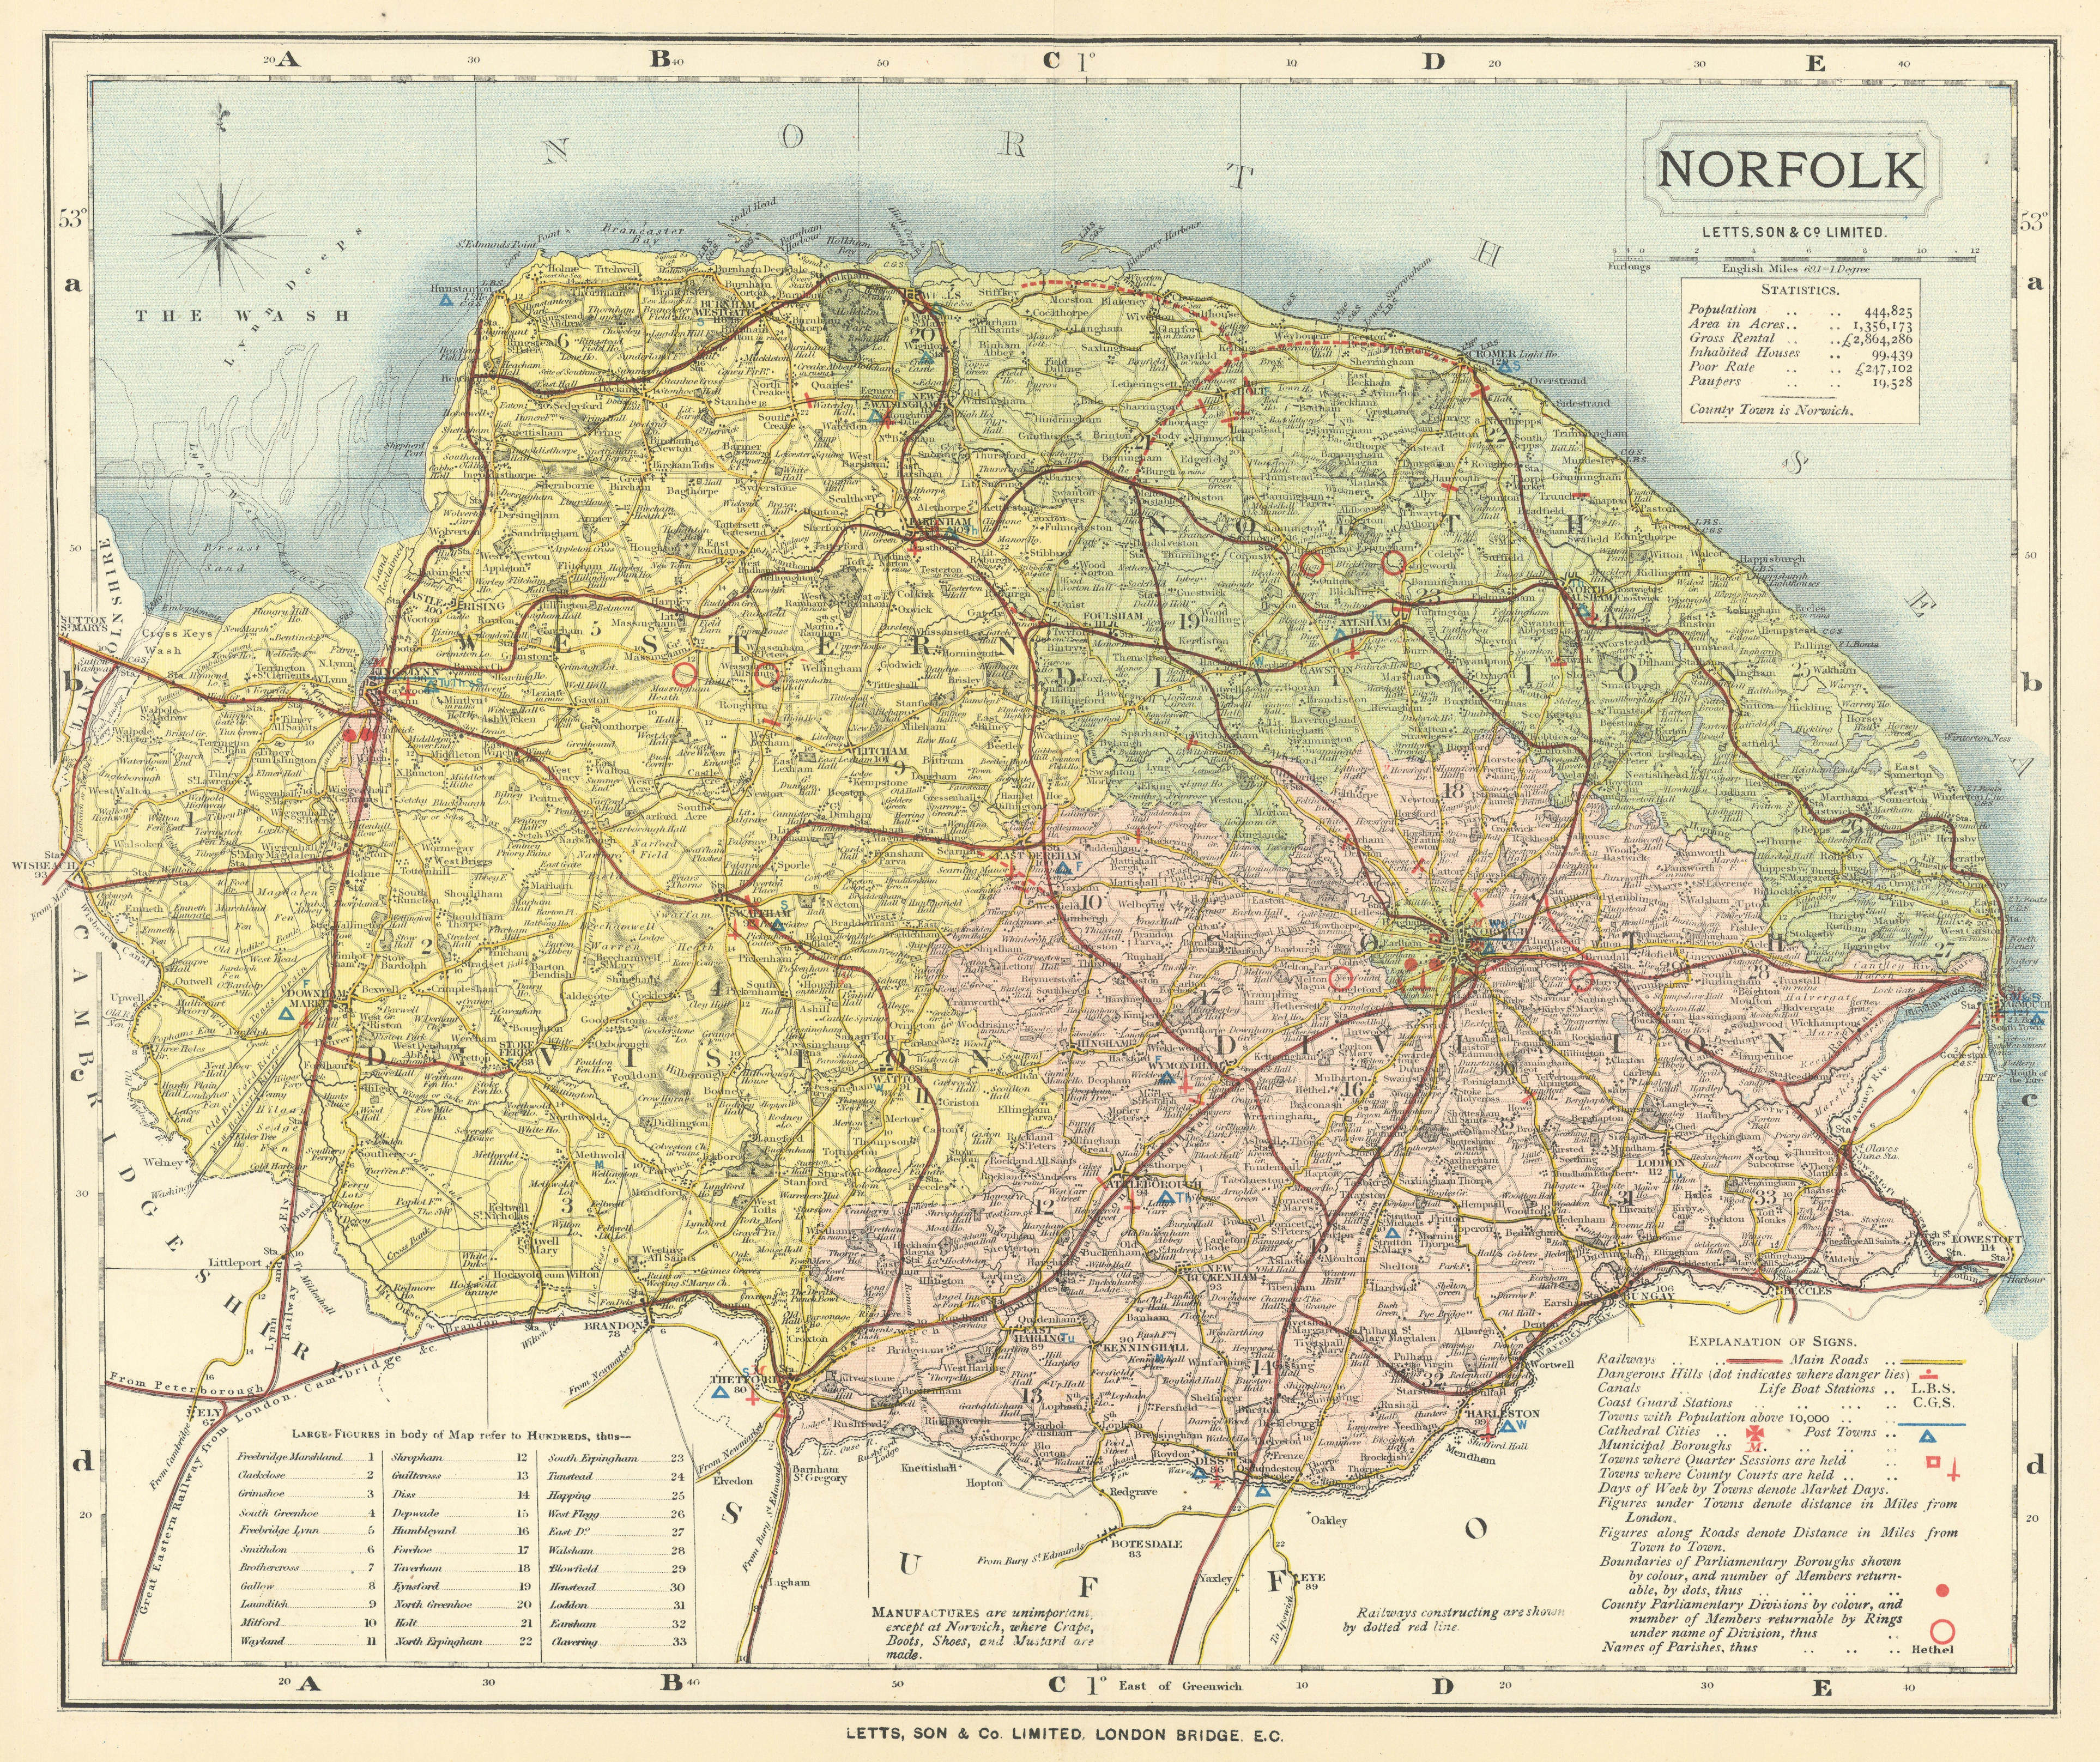 Associate Product Norfolk county map showing Post Towns & Market Days. LETTS 1884 old